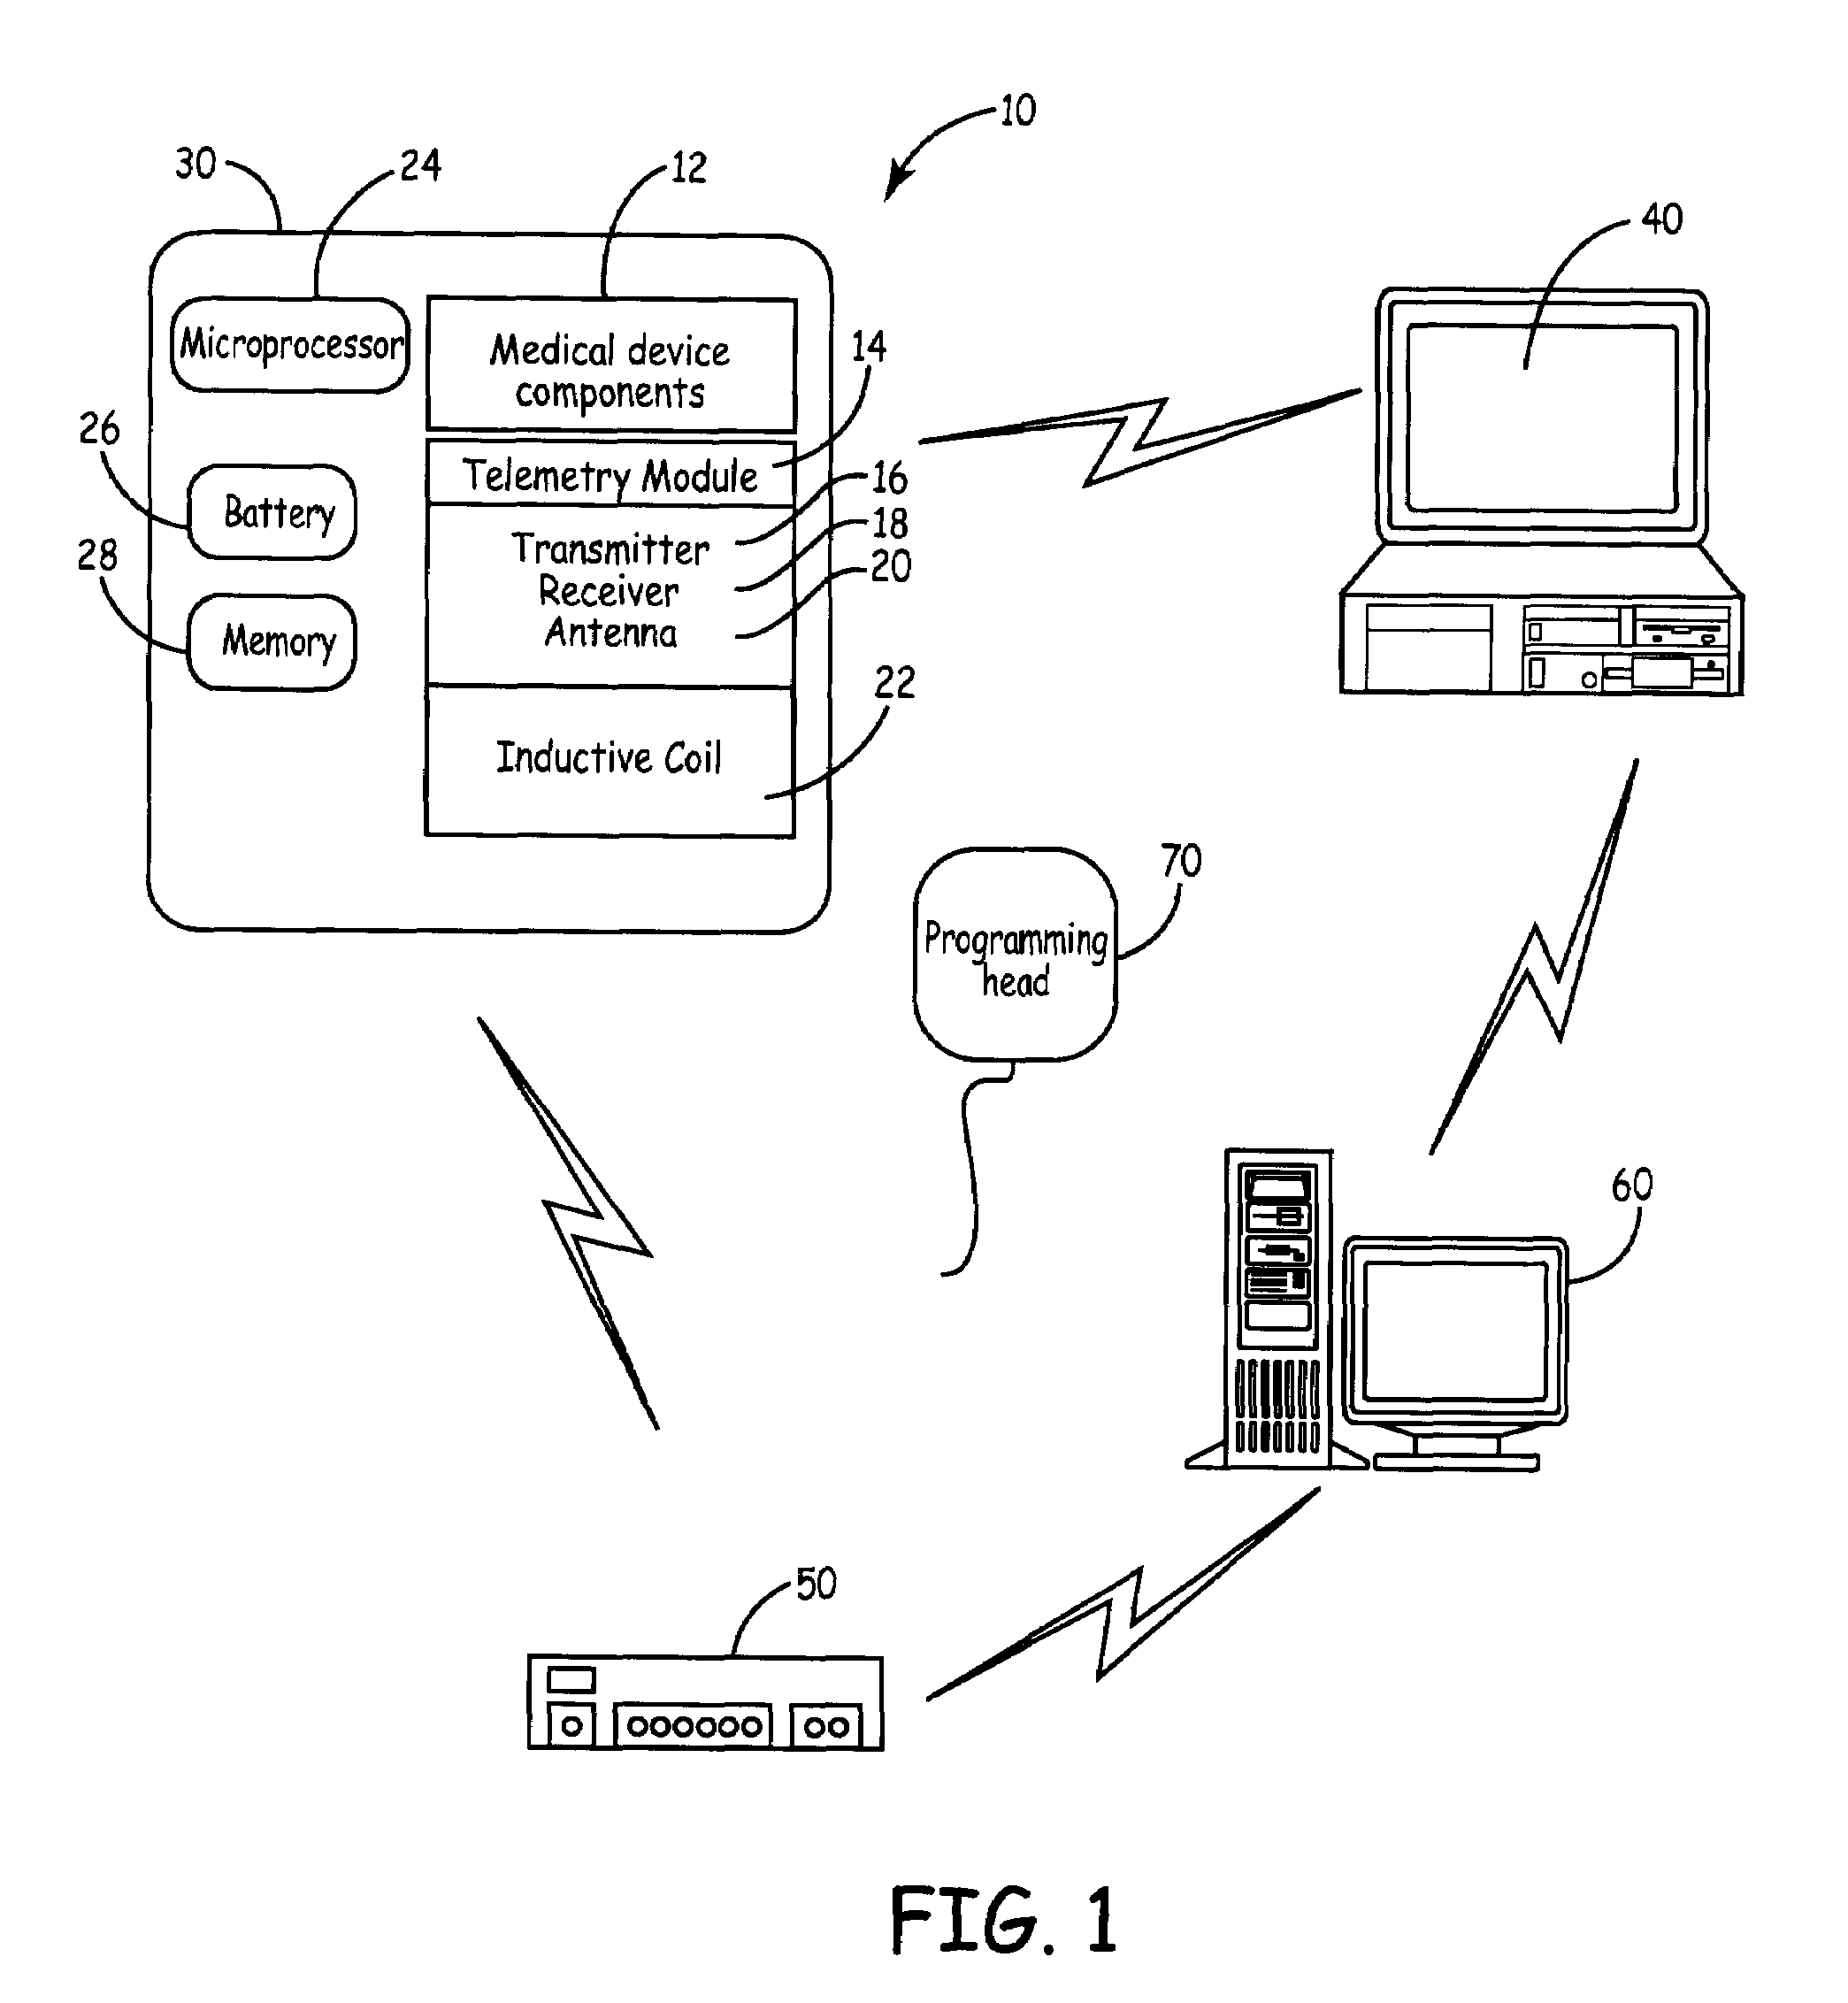 System and method for telemetry with an implantable medical device